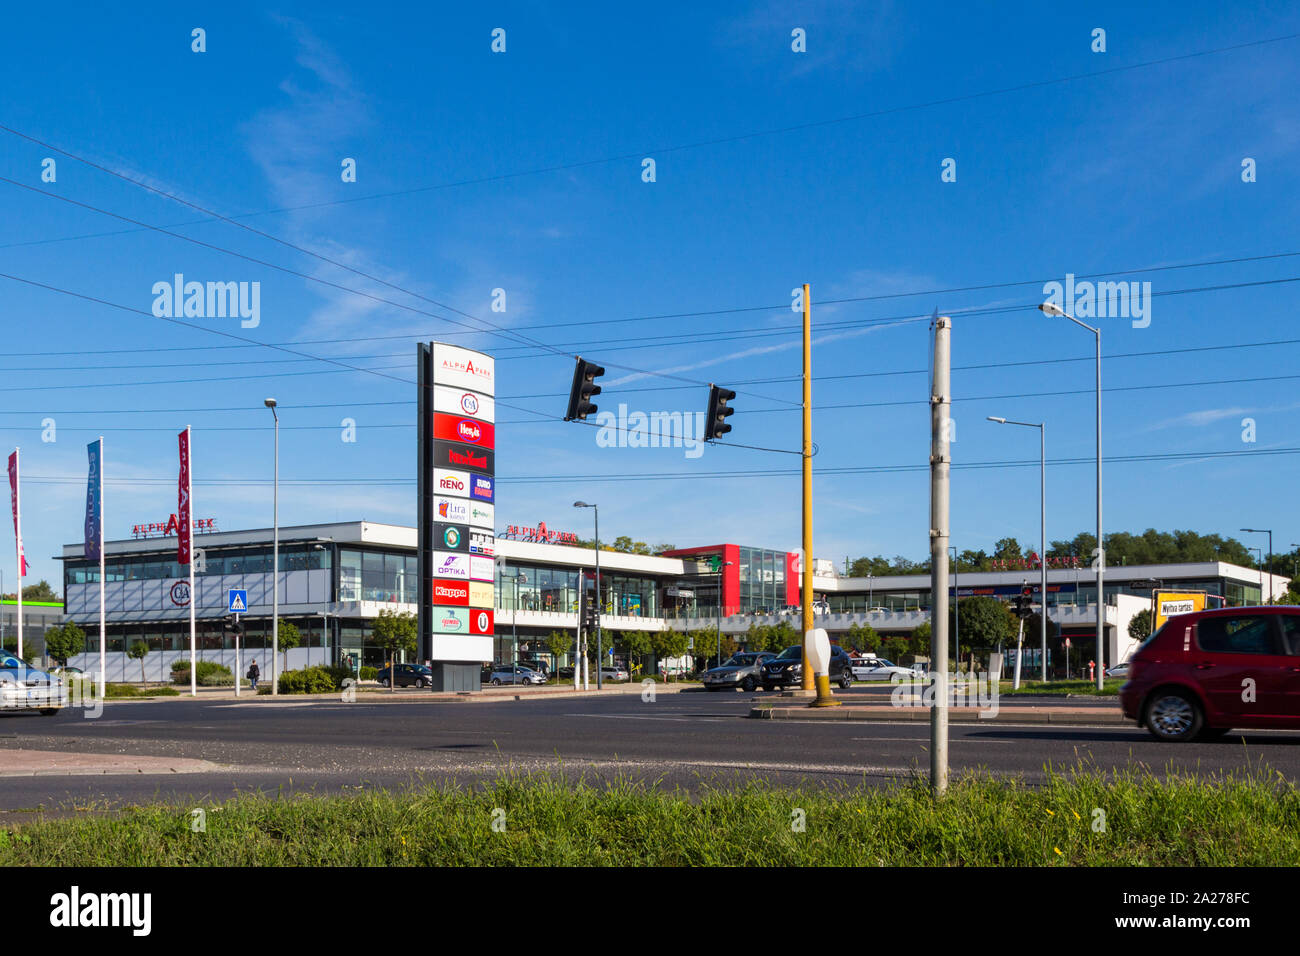 Alphapark shopping centre center with C&A fashion clothing retail store,  Sopron, Hungary Stock Photo - Alamy